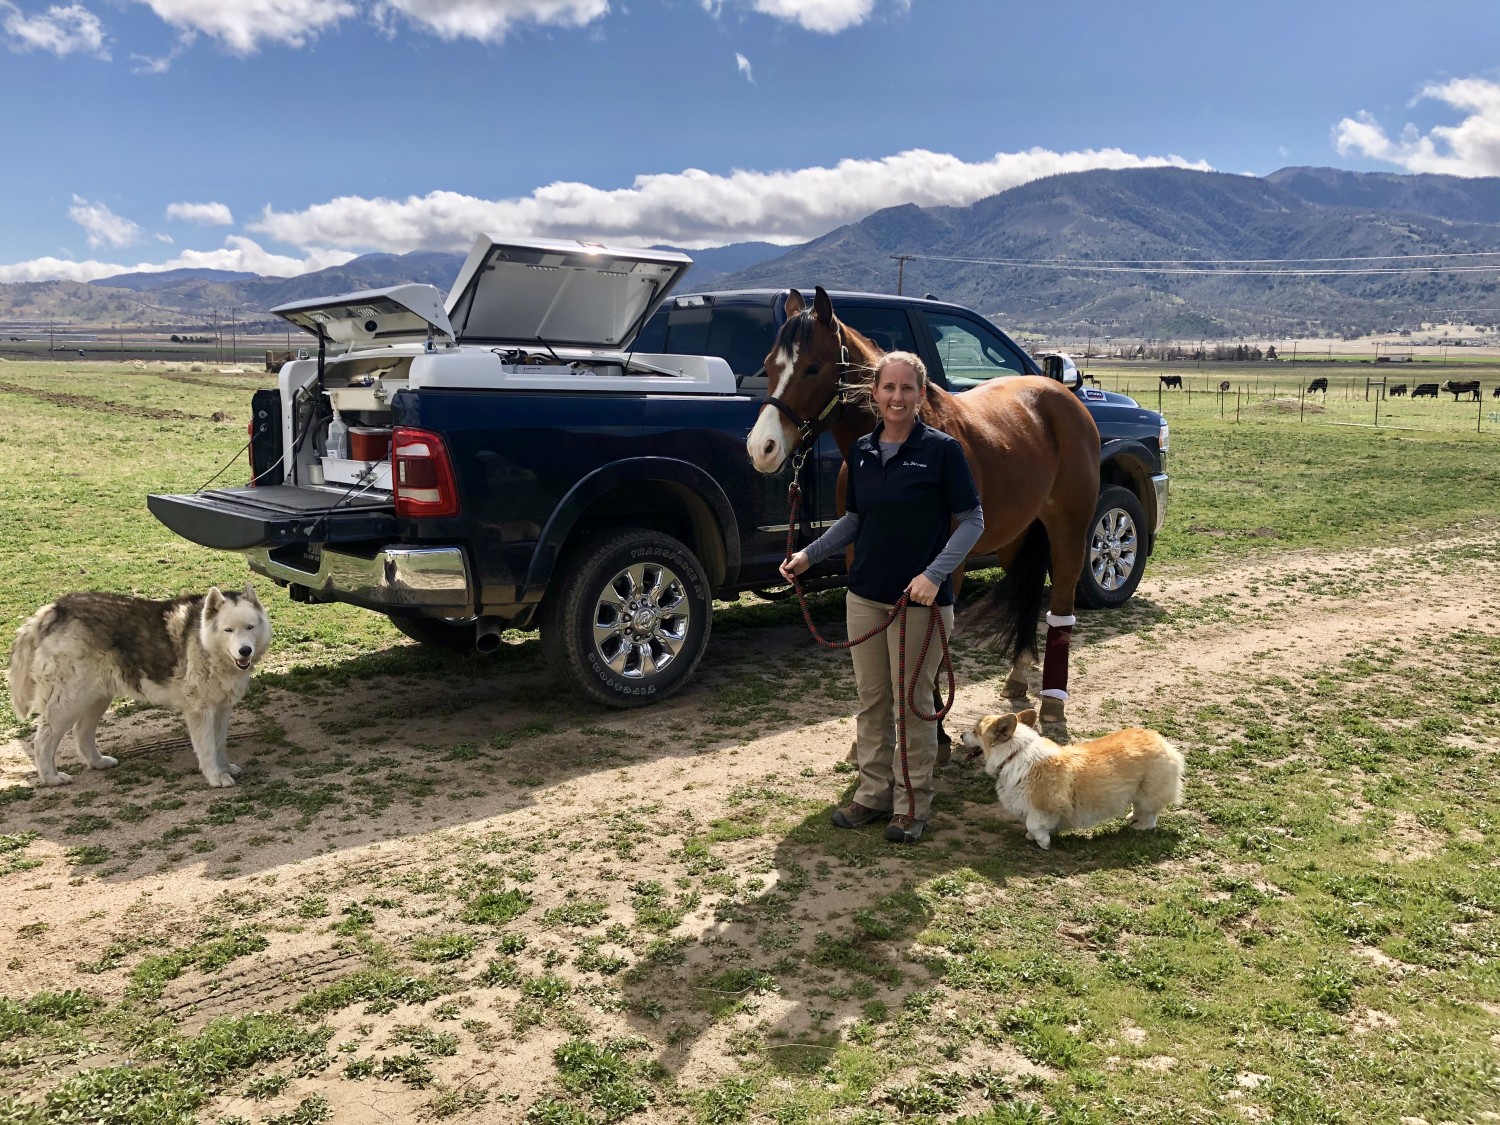 Stephanie Darrow outside with horse and 2 dogs beside a truck